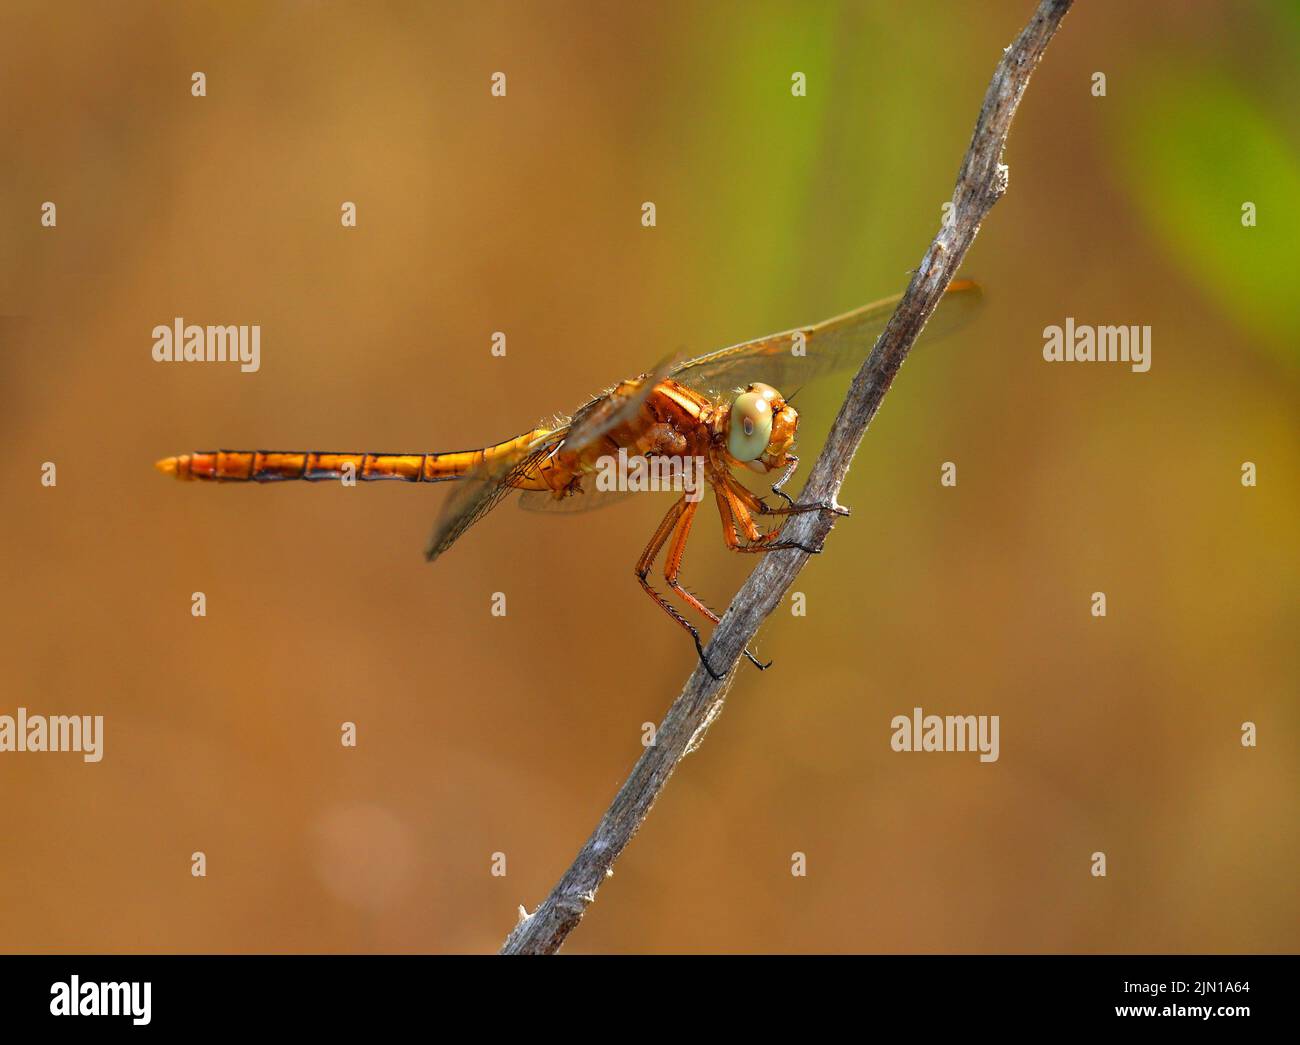 Female Keeled Skimmer Dragonfly - Orthetrum Coerulesce perching on a twig in its natural environment. Macro photo, selective shallow focus for effect. Stock Photo